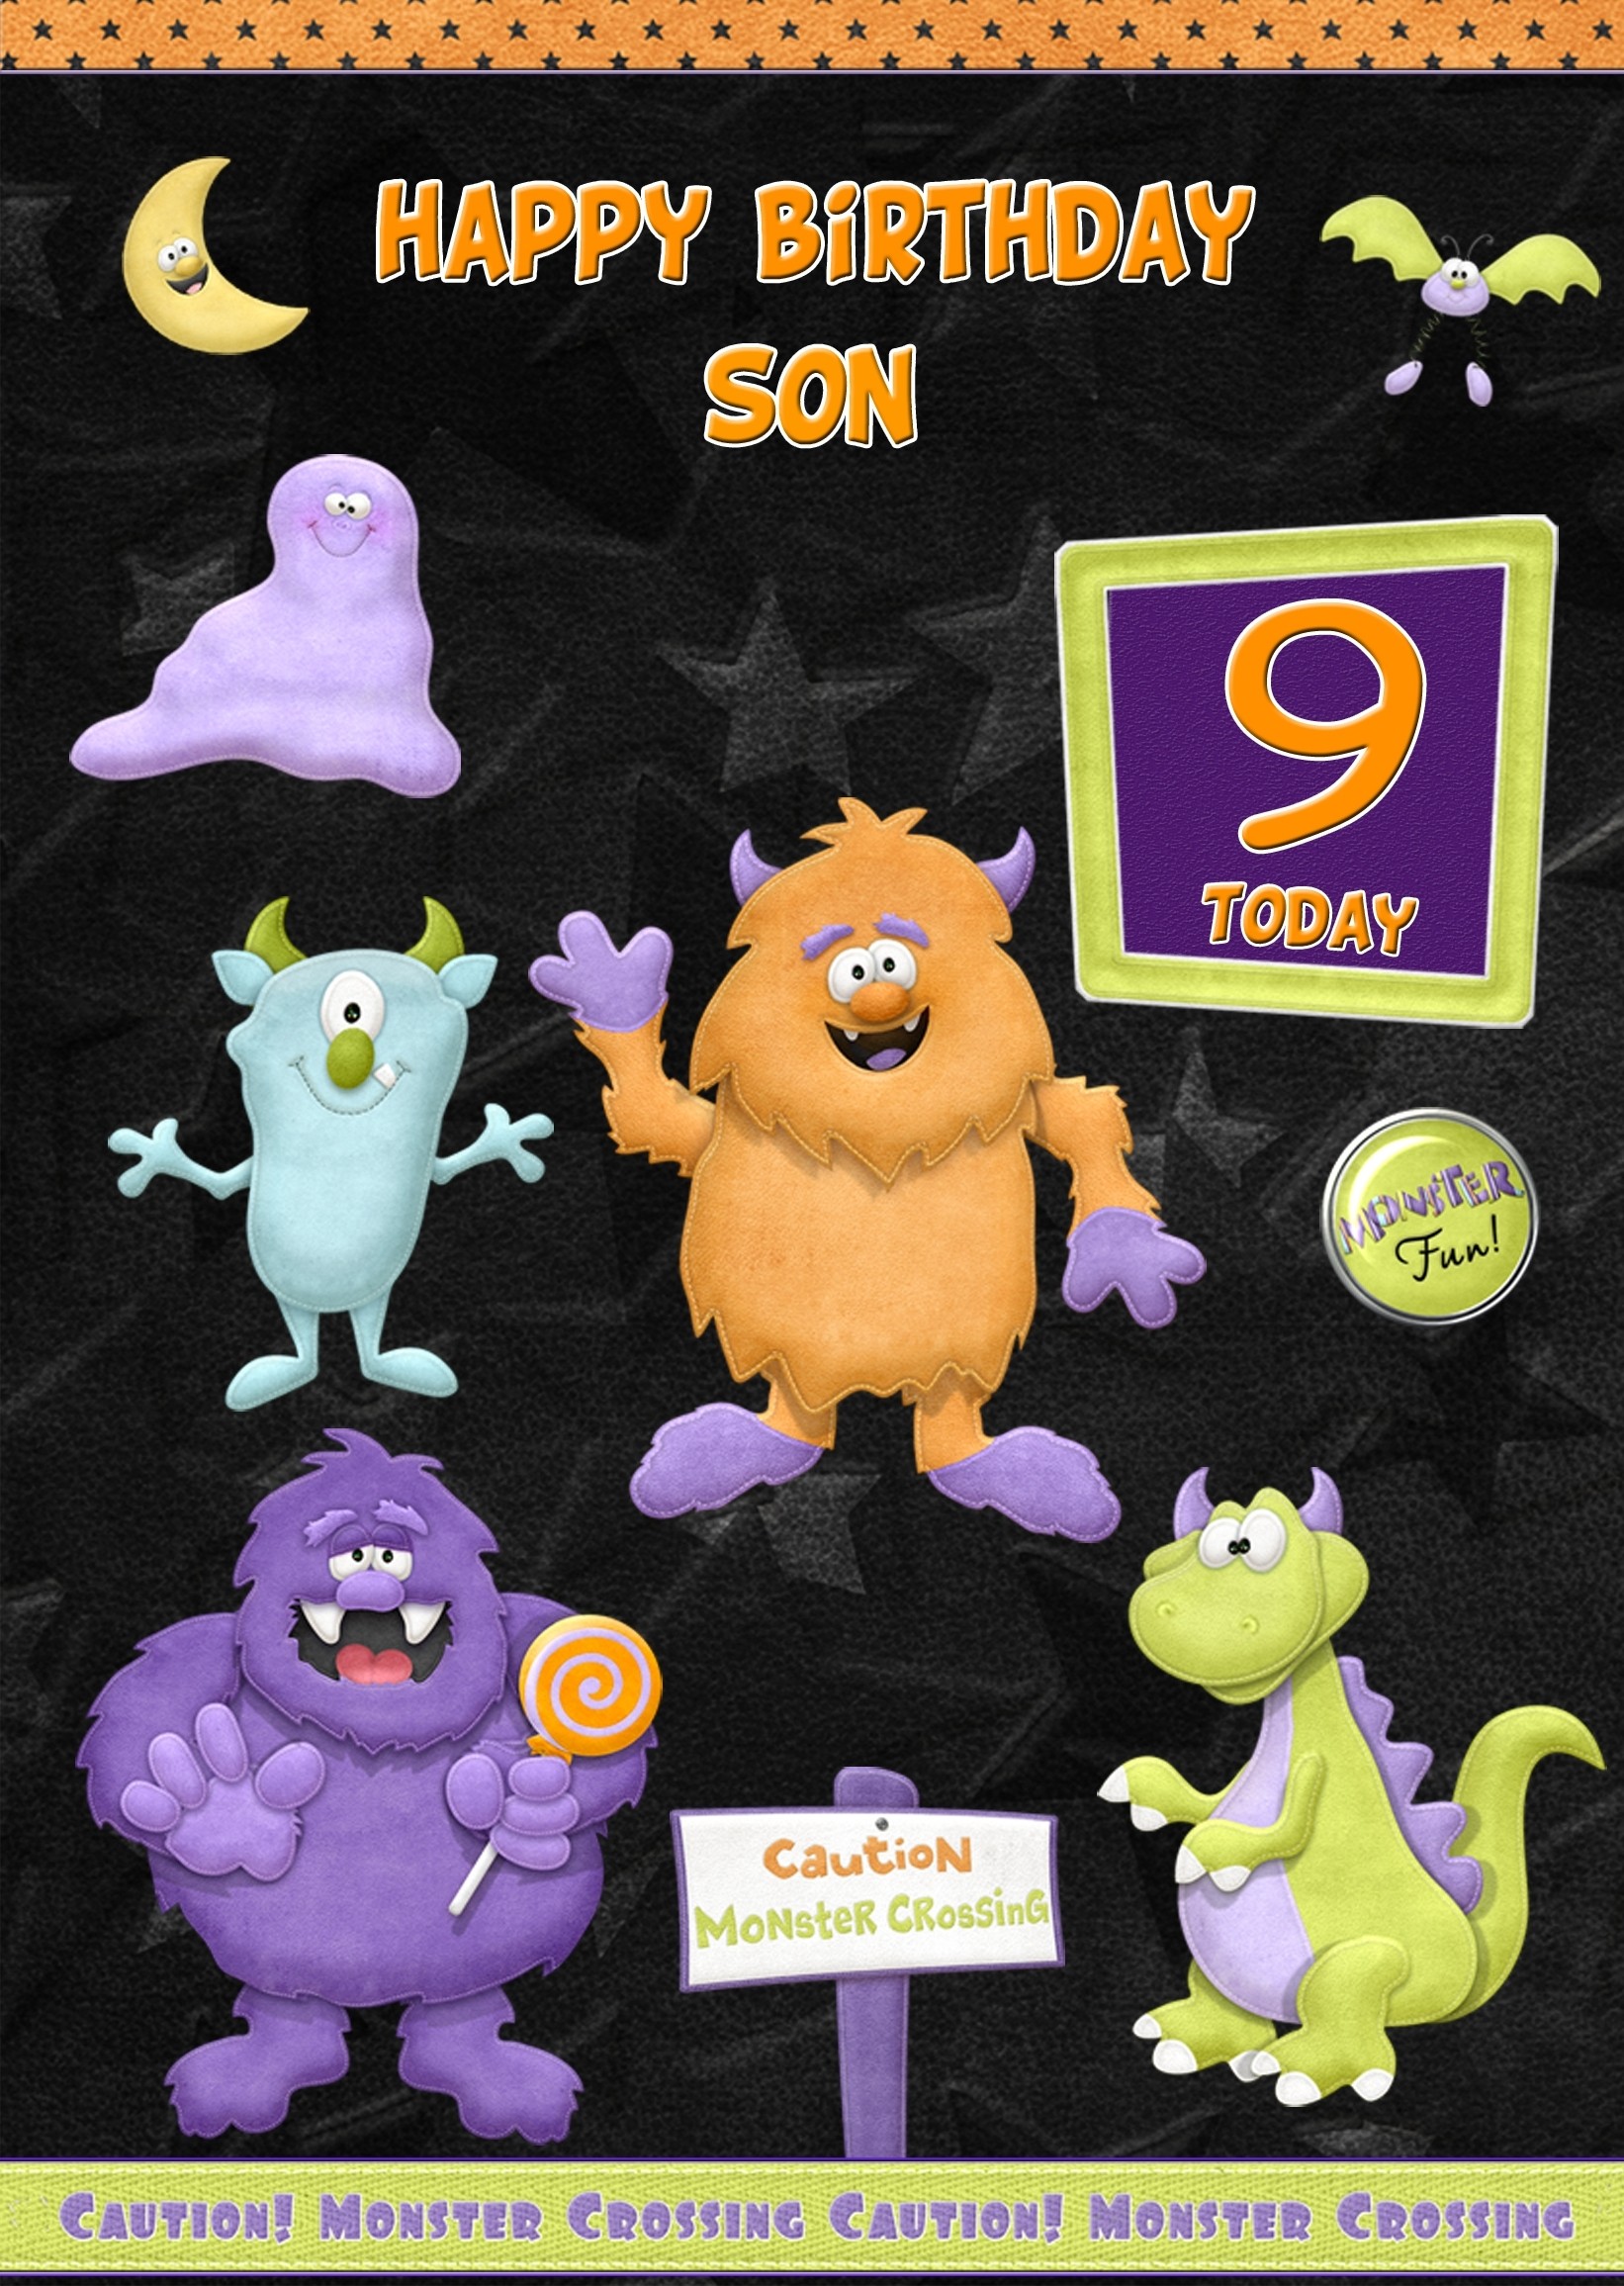 Kids 9th Birthday Funny Monster Cartoon Card for Son